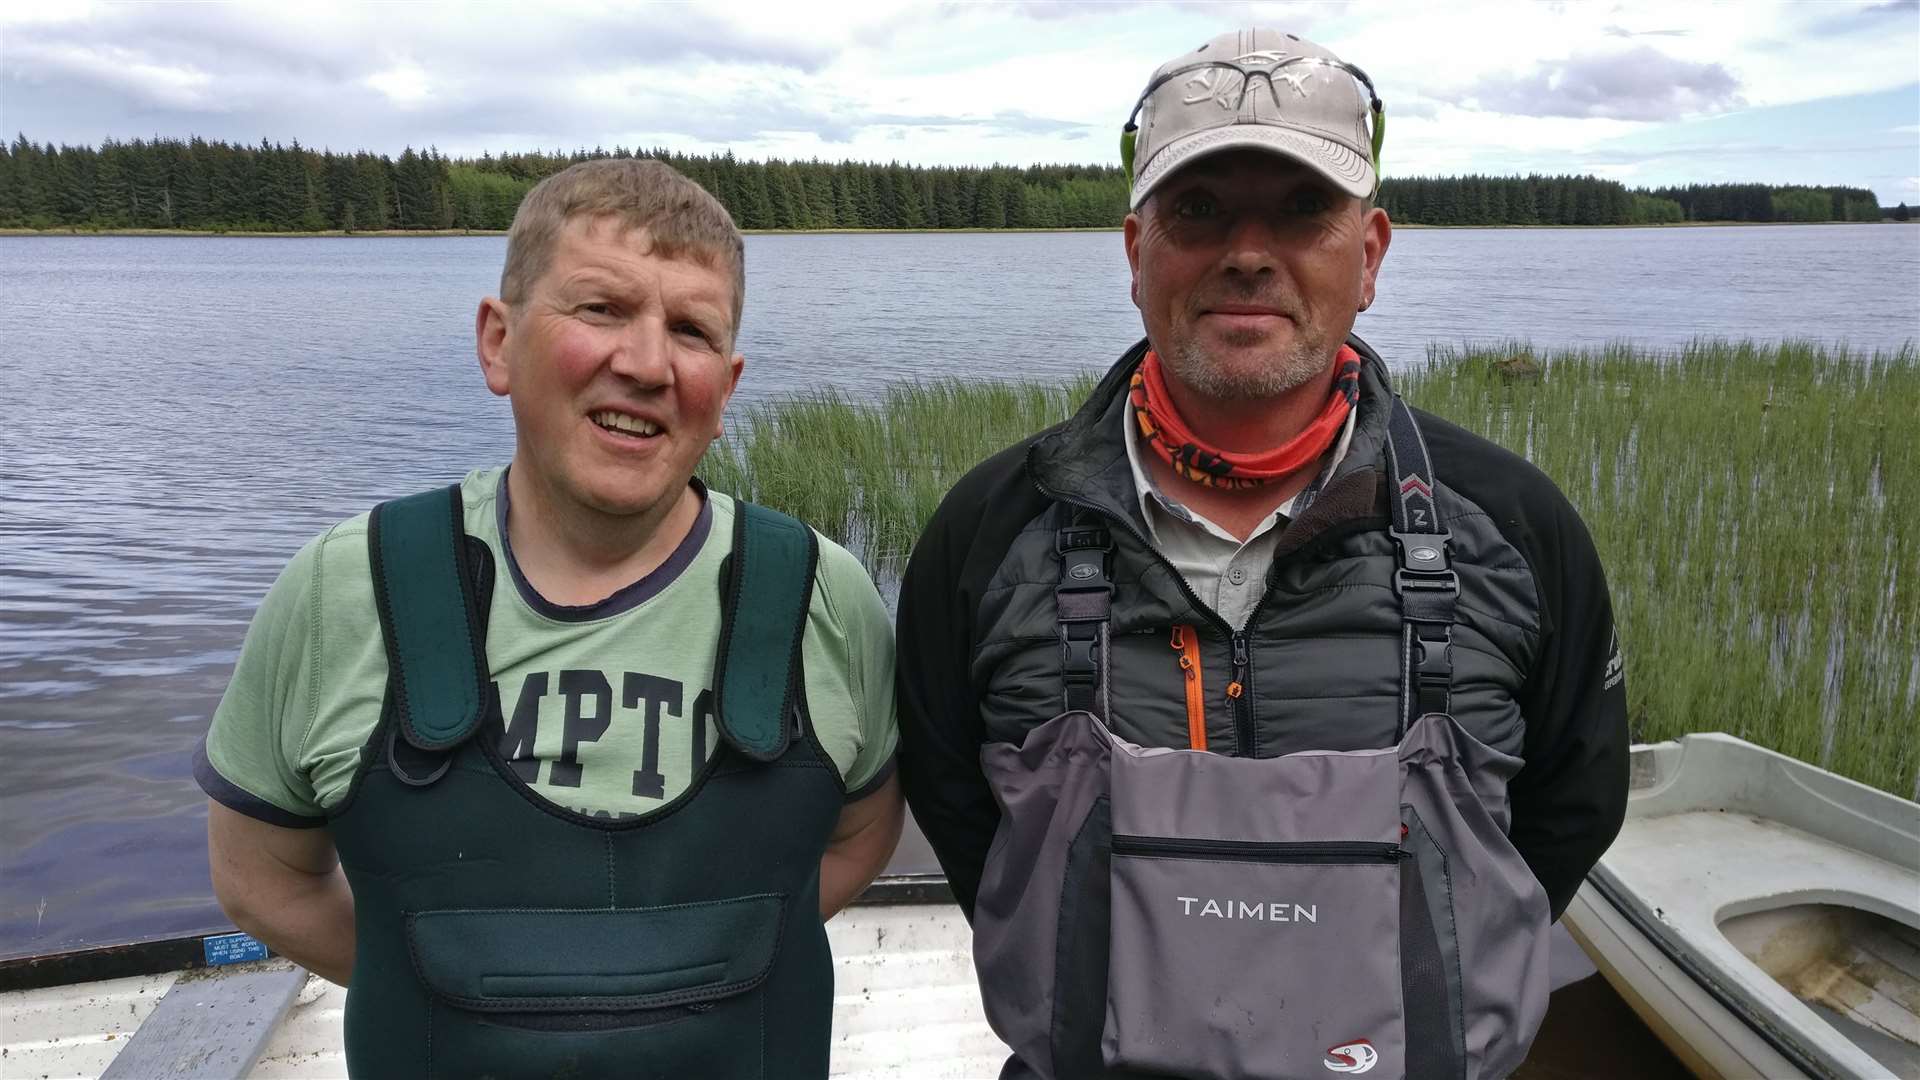 Winner Alex Donald (left) with Robbie Hawken, who had the best fish.